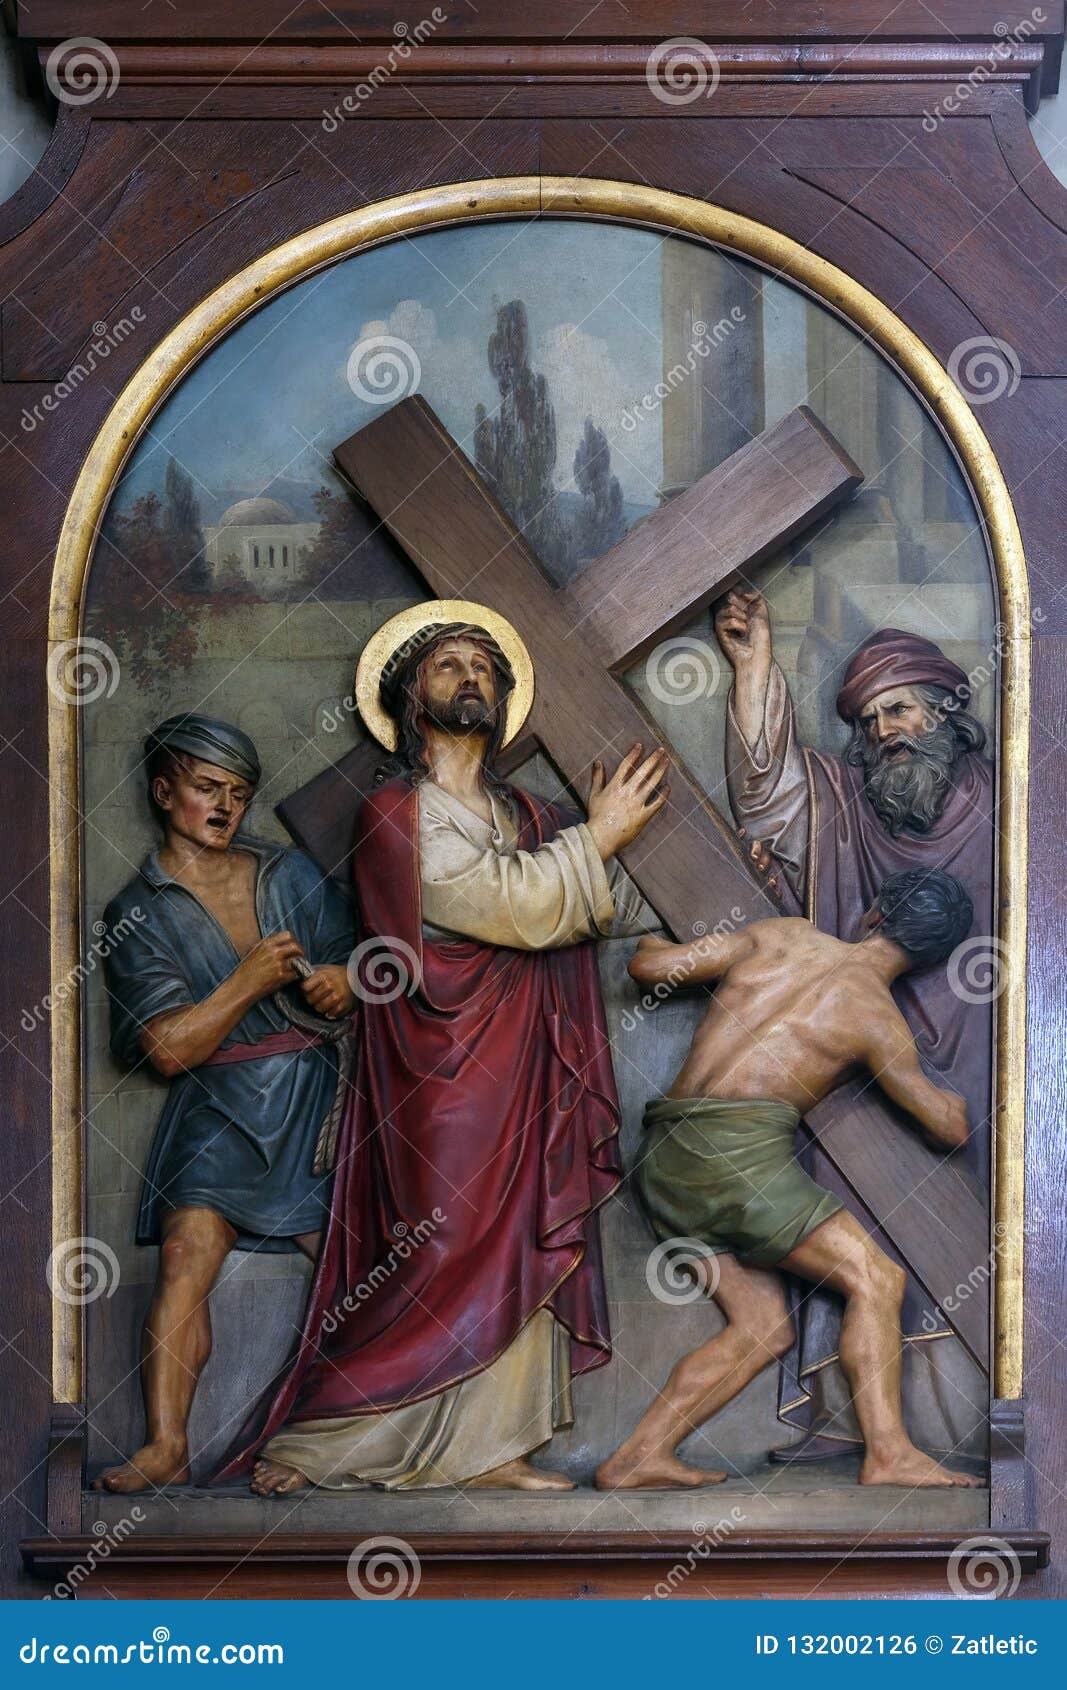 2nd stations of the cross, jesus is given his cross